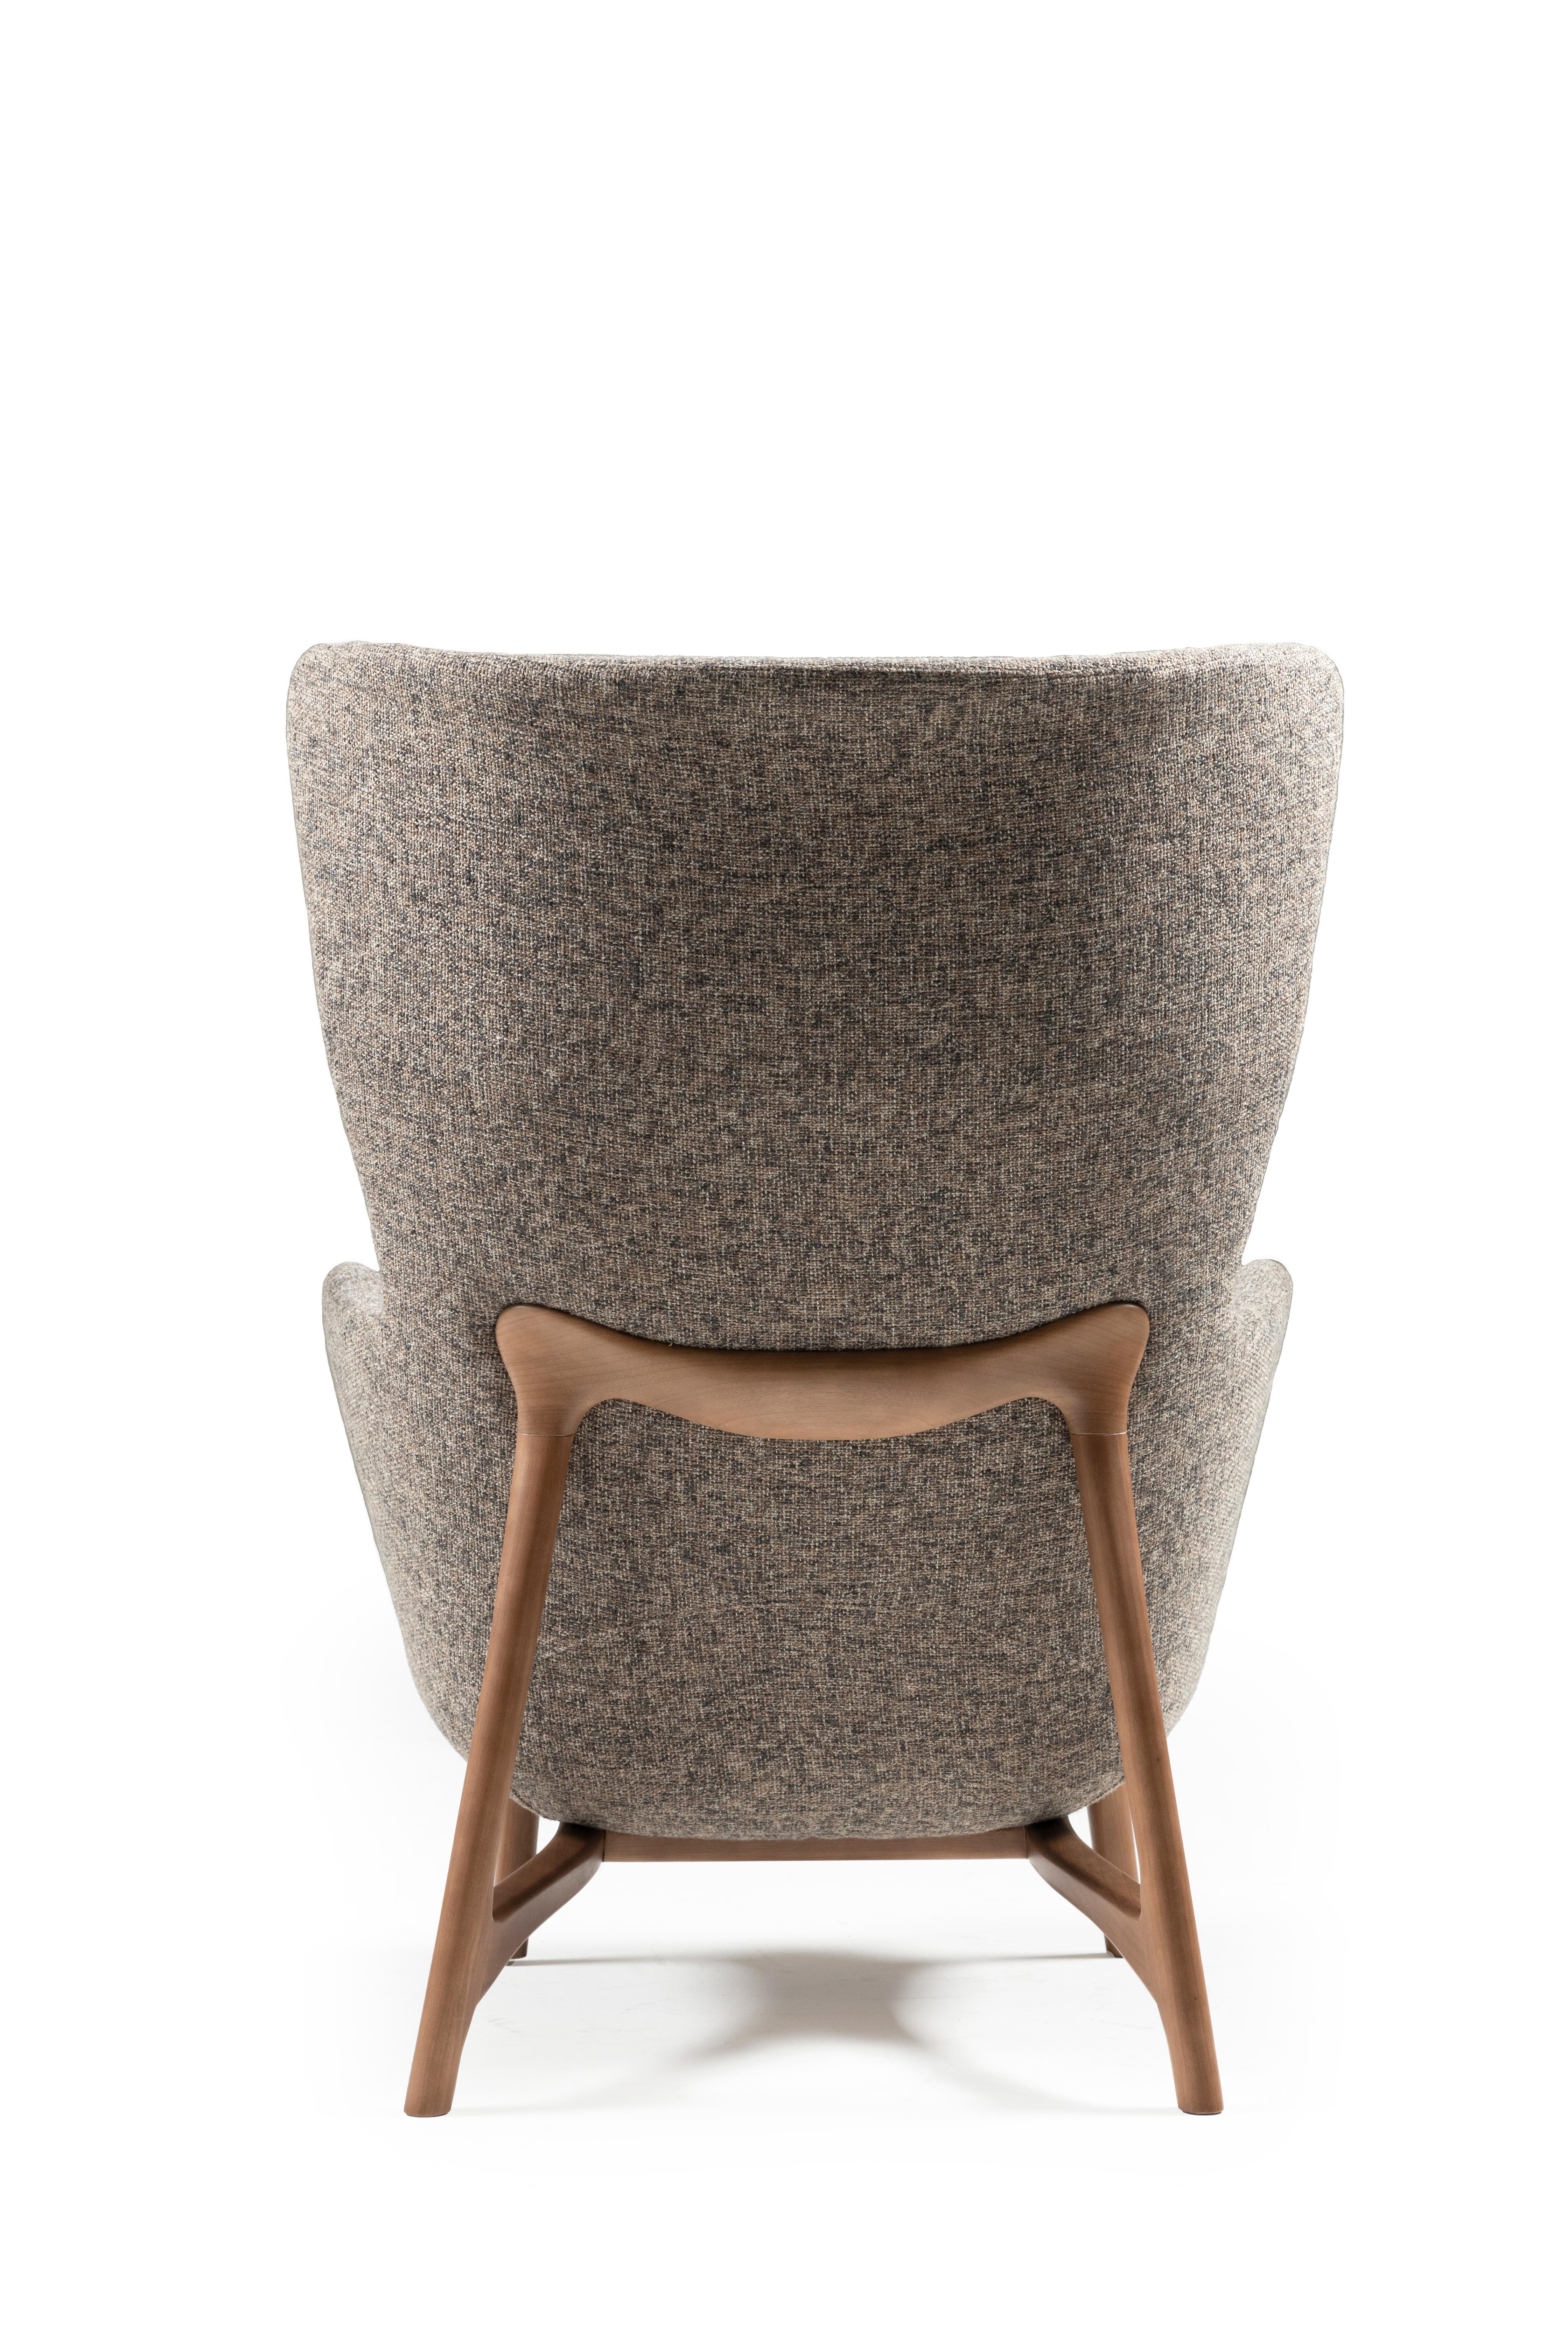 Modern Sublime High Armchairs, Contemporary Style in Solid Wood, Textiles Upholstery For Sale